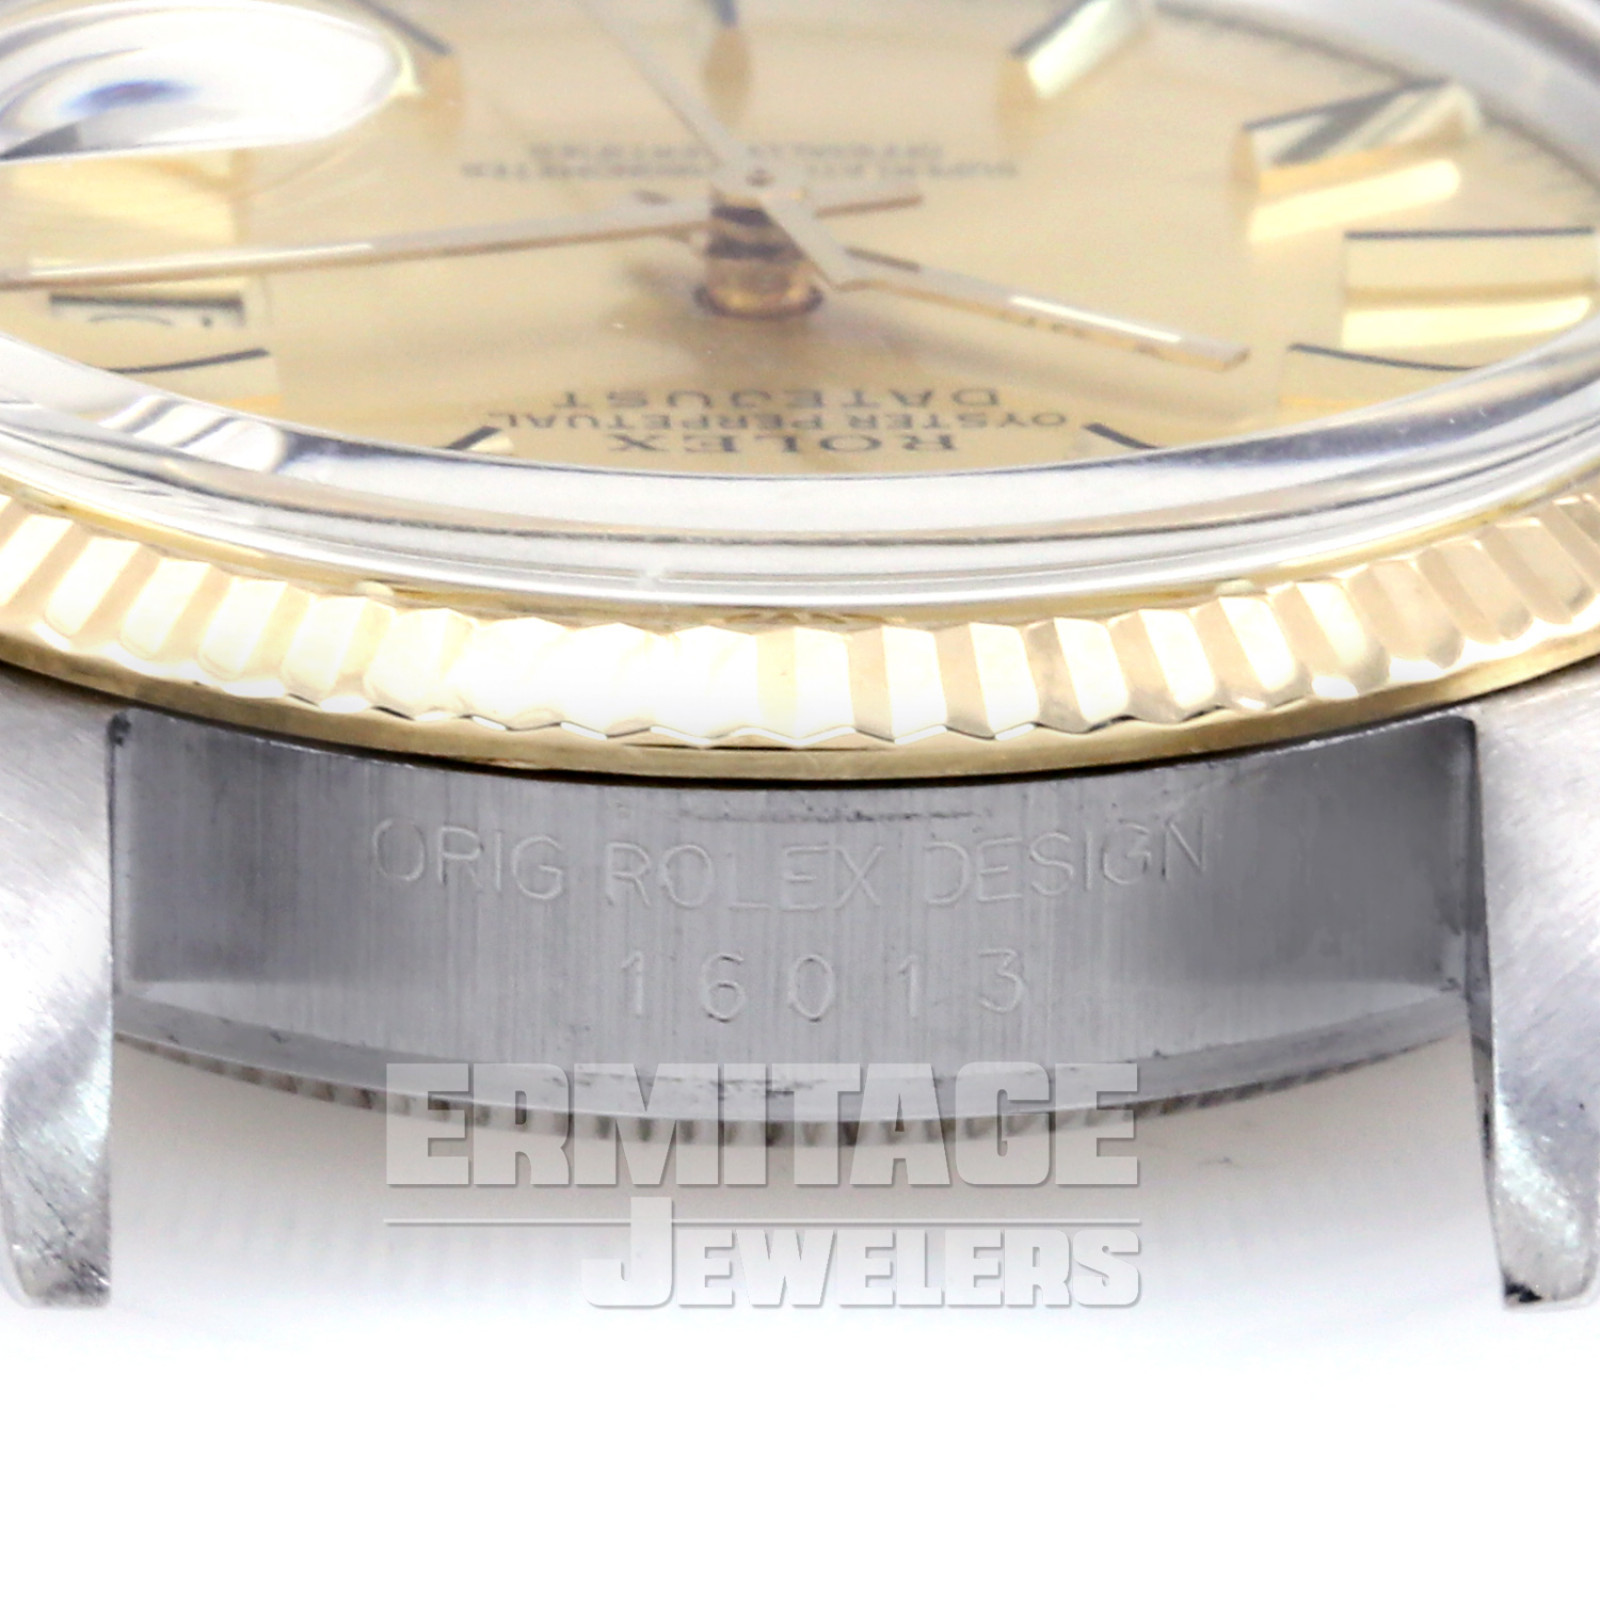 Used Rolex Datejust 16013 with Champagne Dial